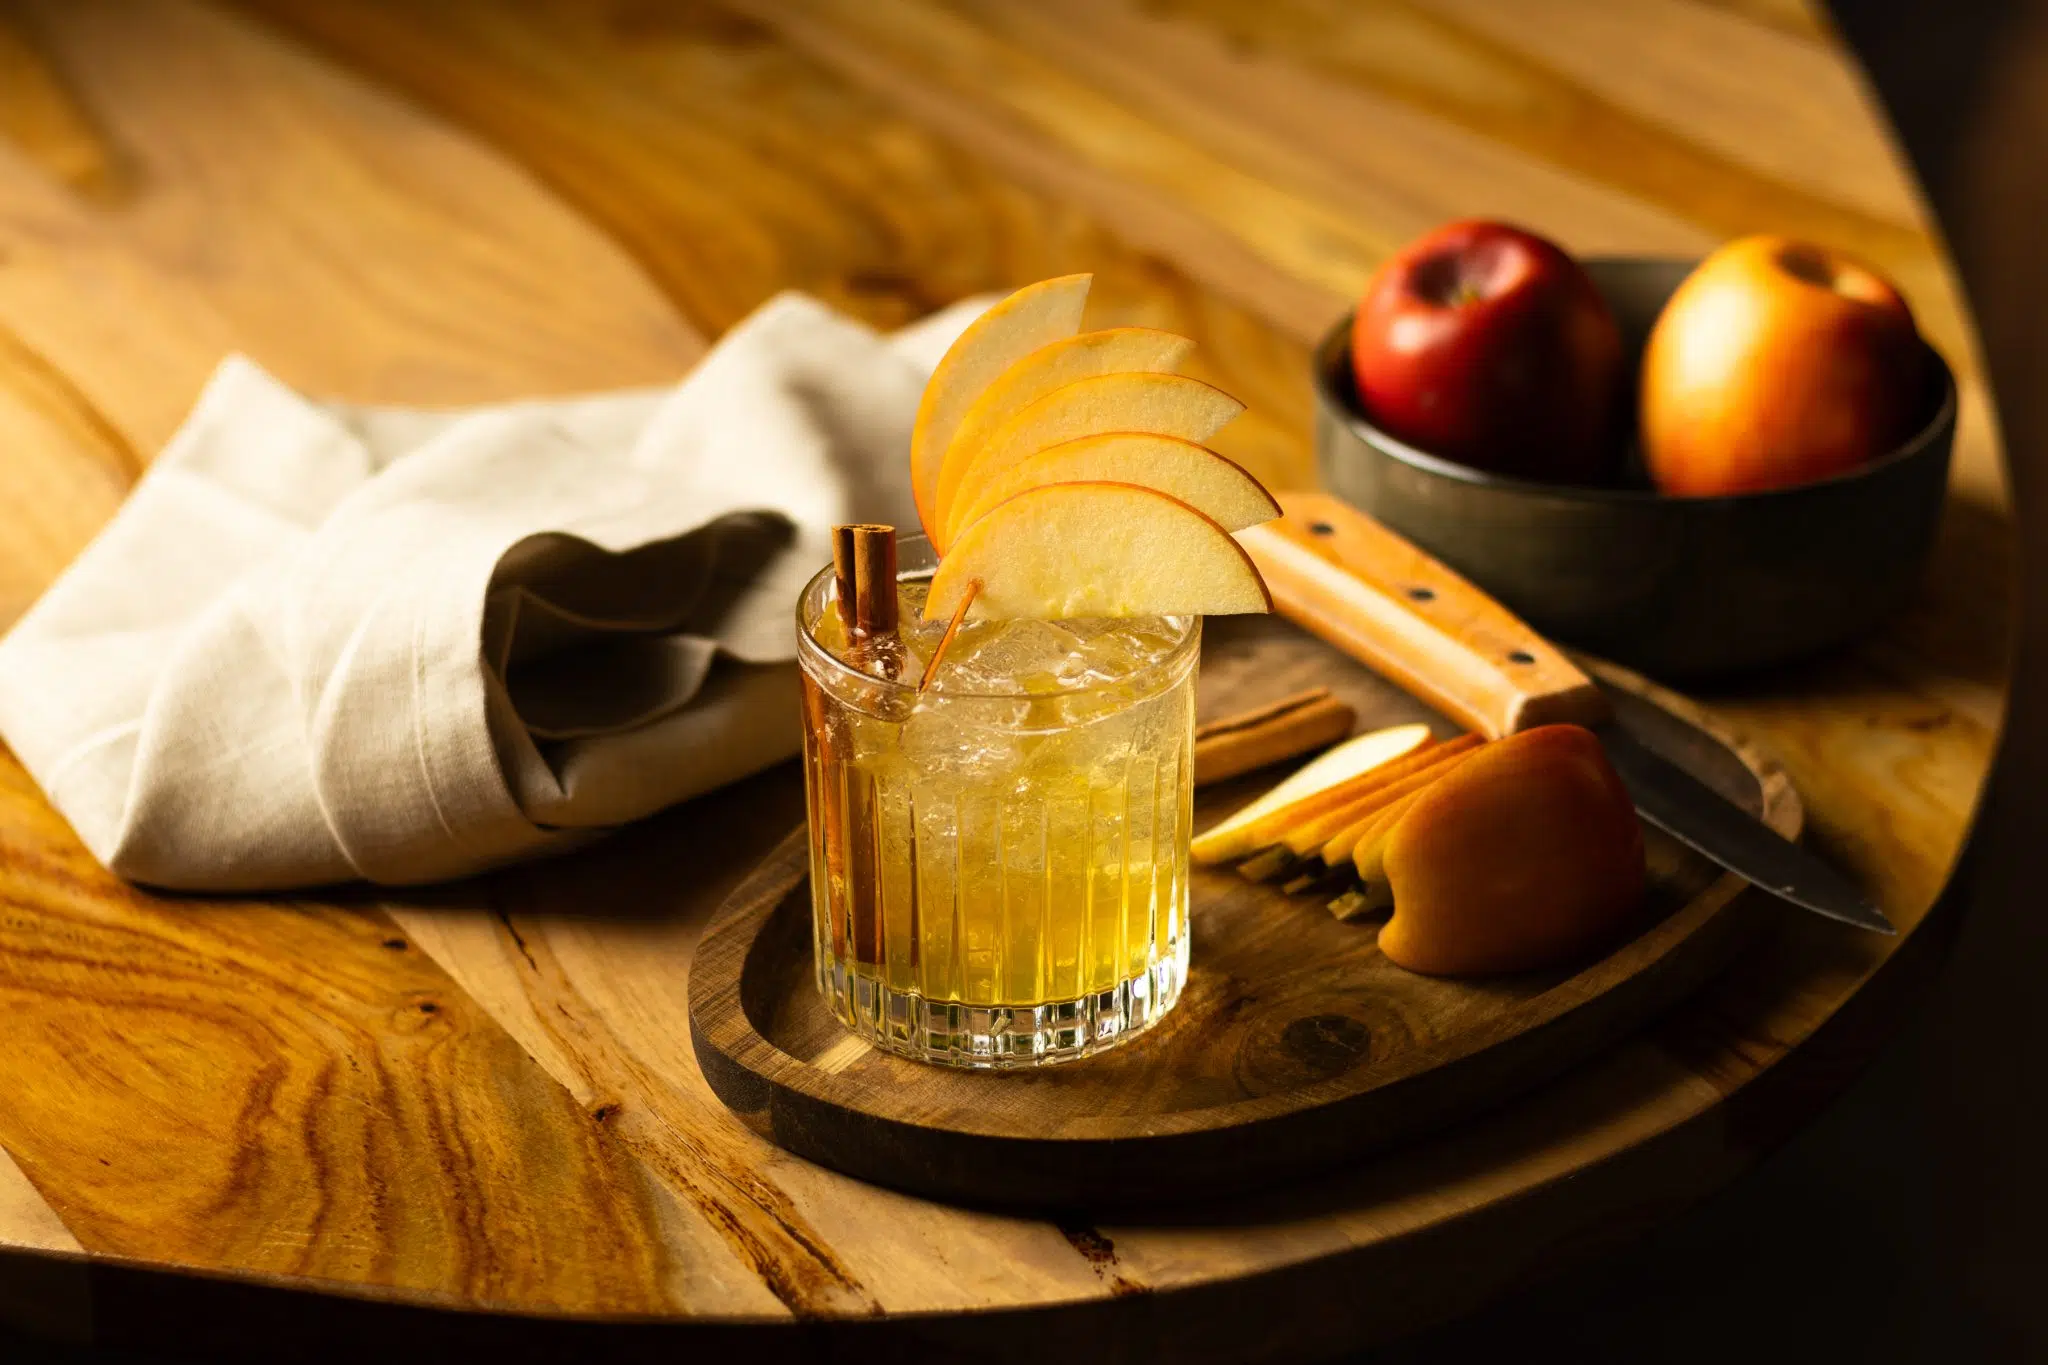 A side shot of a Harvest Punch cocktail in an old fashioned glass on a wooden board placed on a wooden table surrounded by two apples, a white cloth and apple slices.